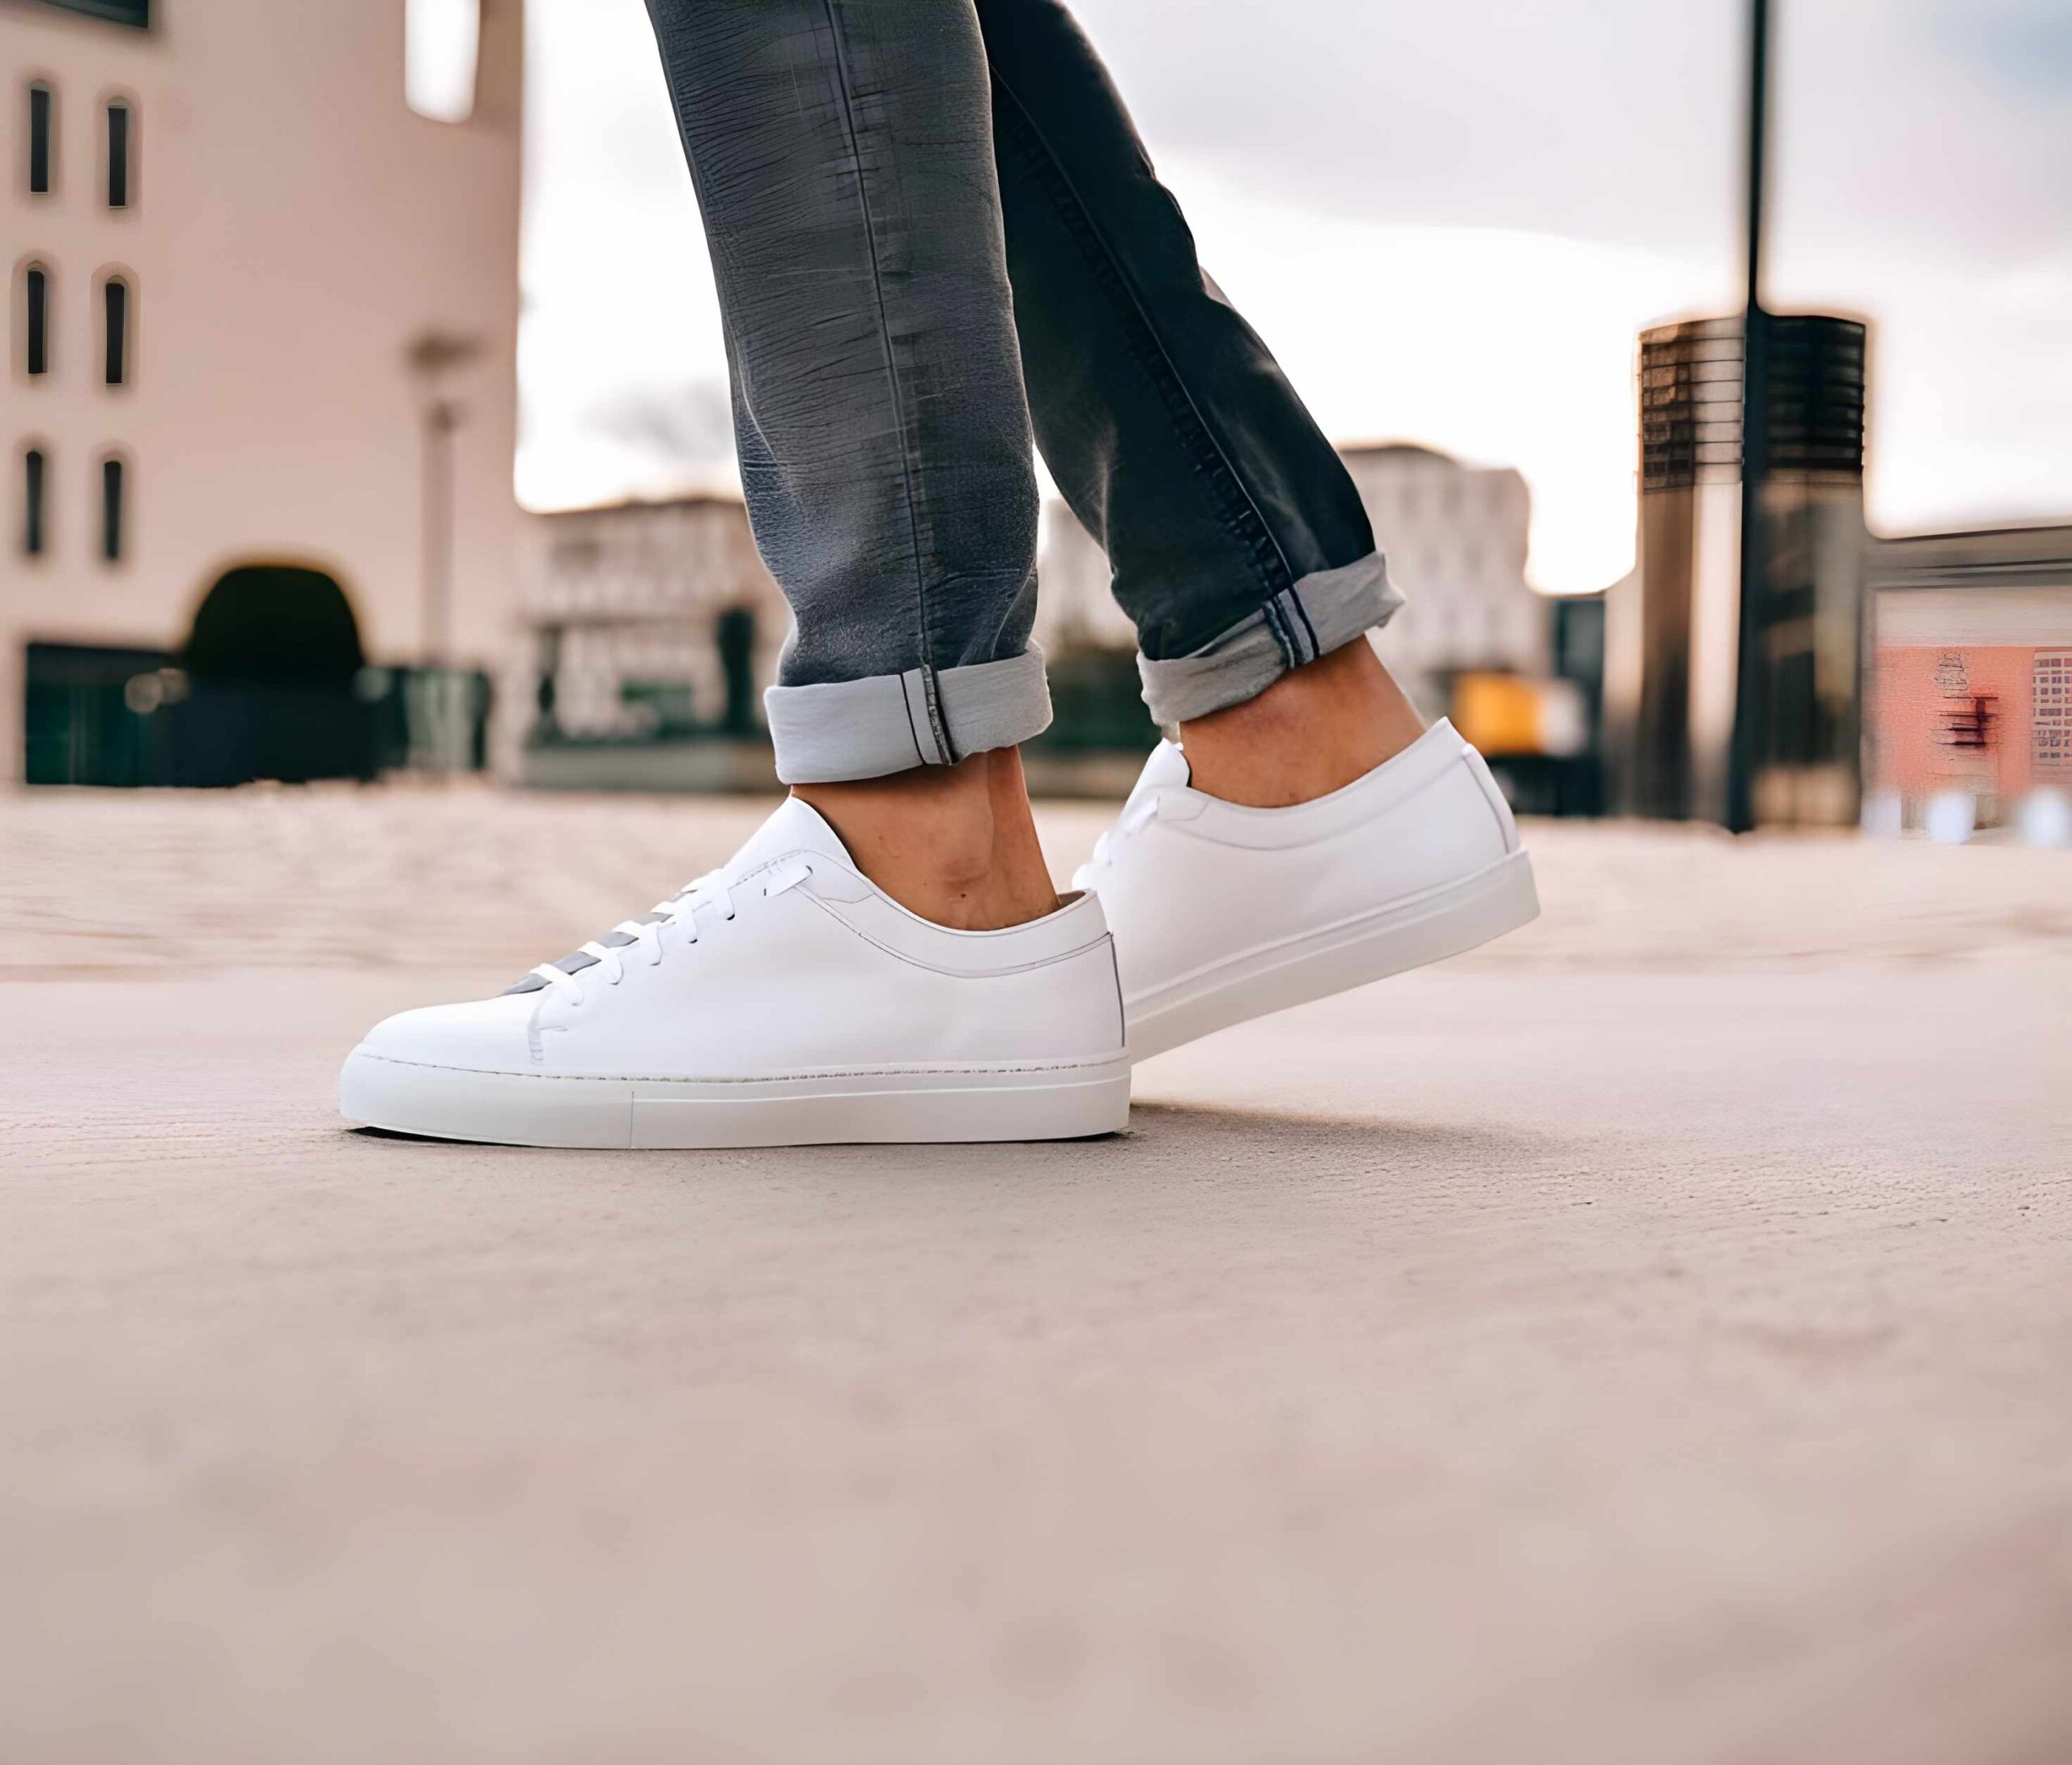 The Best White Sneakers For Men